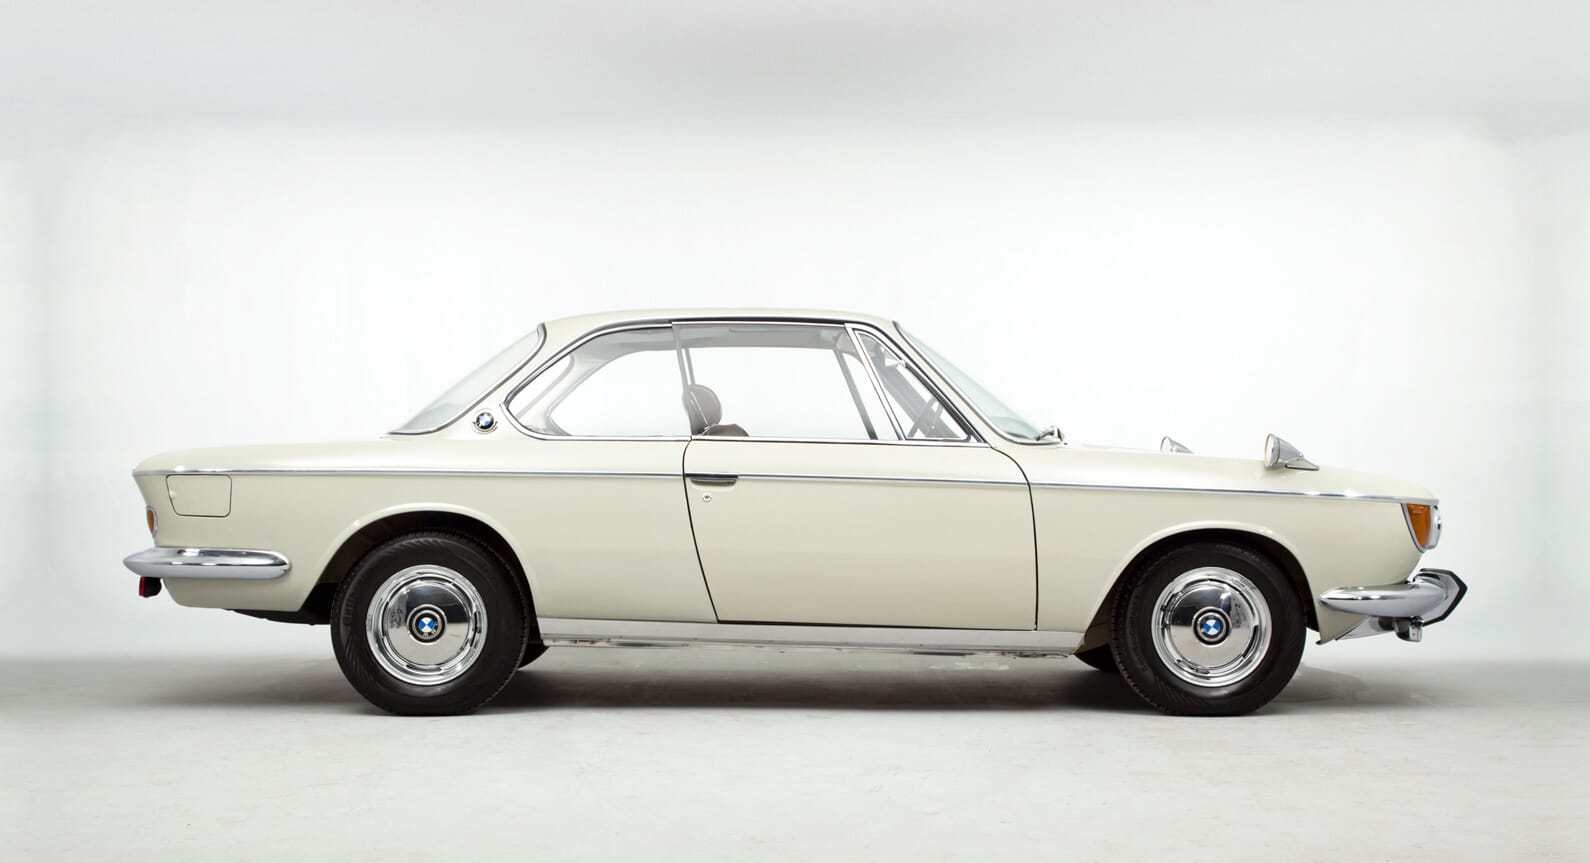 Investment Pieces Don't Get Better Than This BMW 2000CS